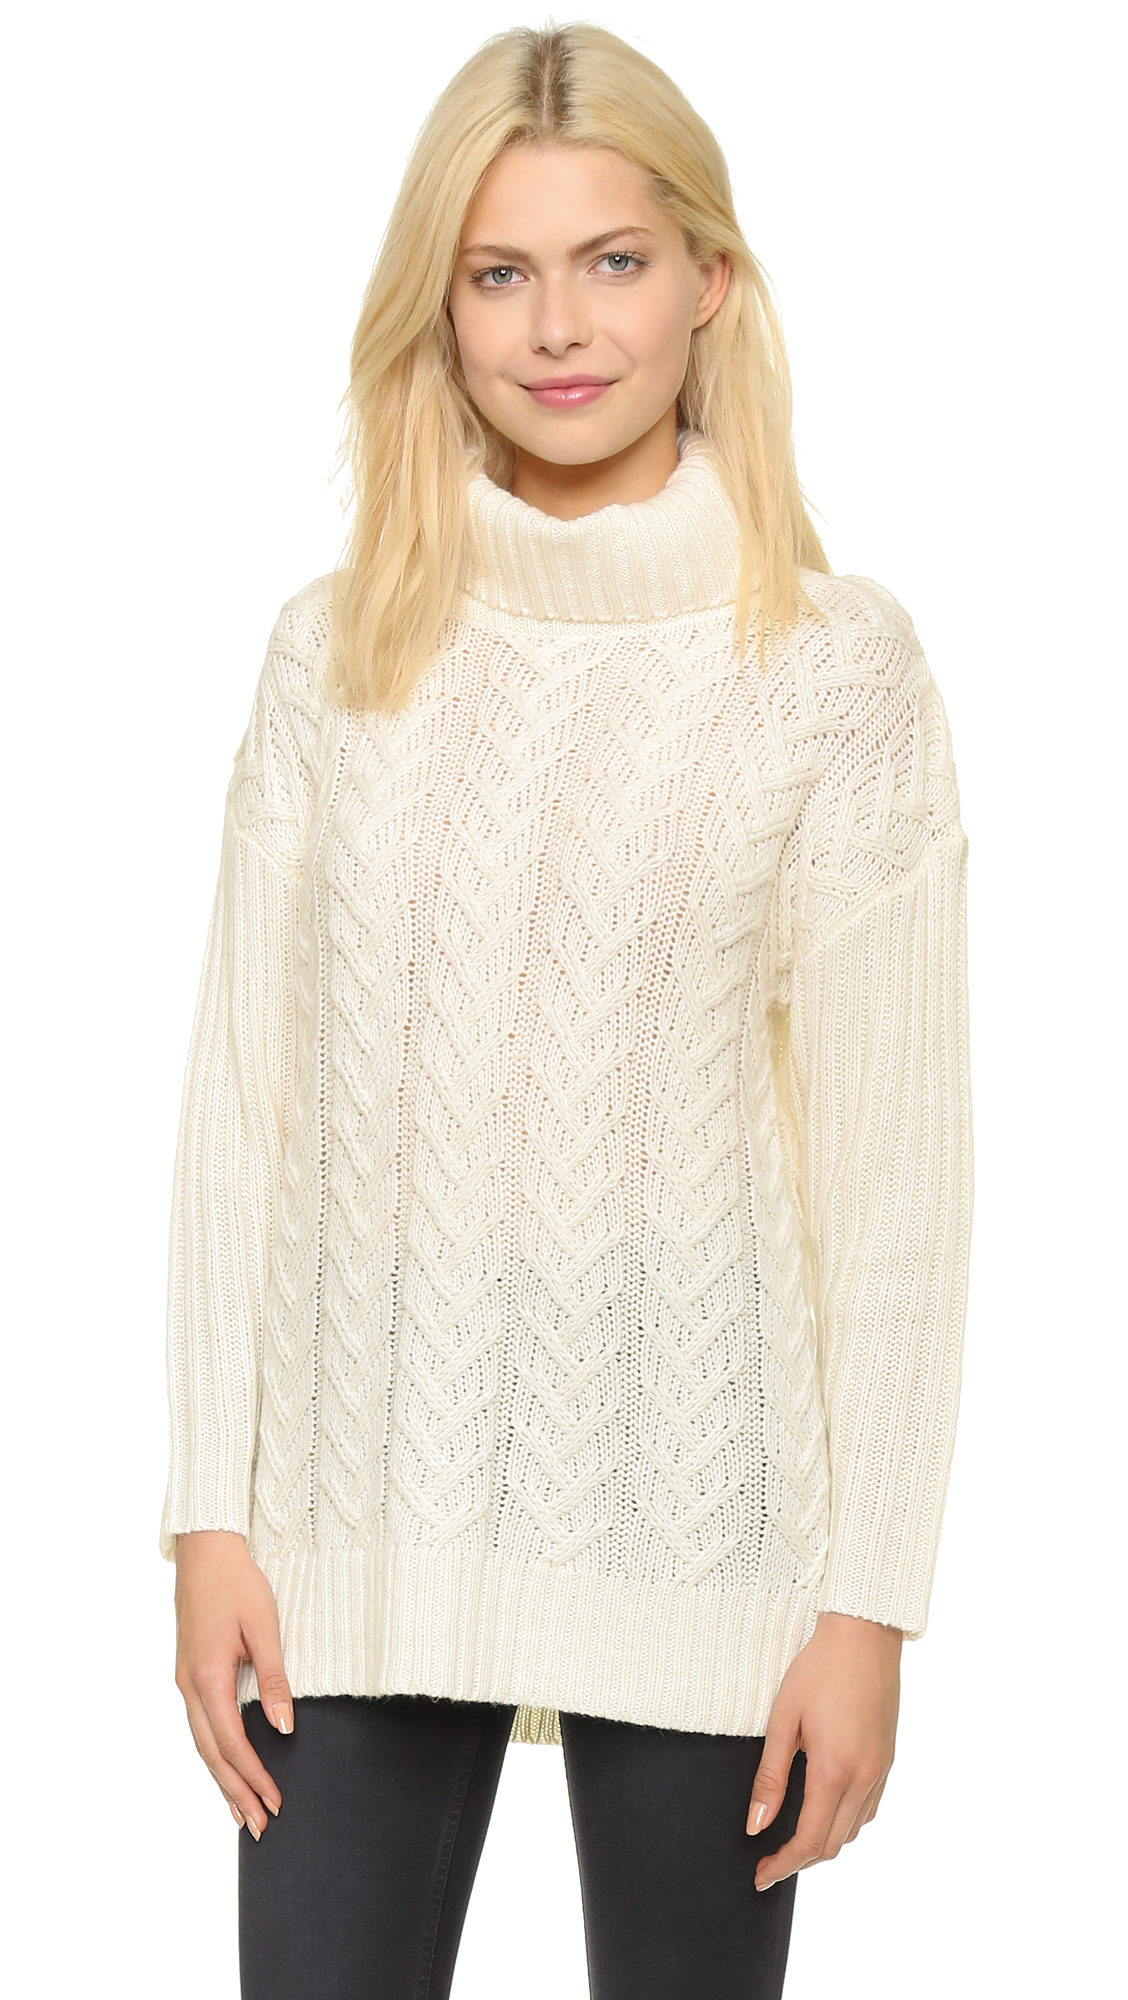 Lyst - Glamorous Cable Knit Turtleneck Sweater - Cream in Natural